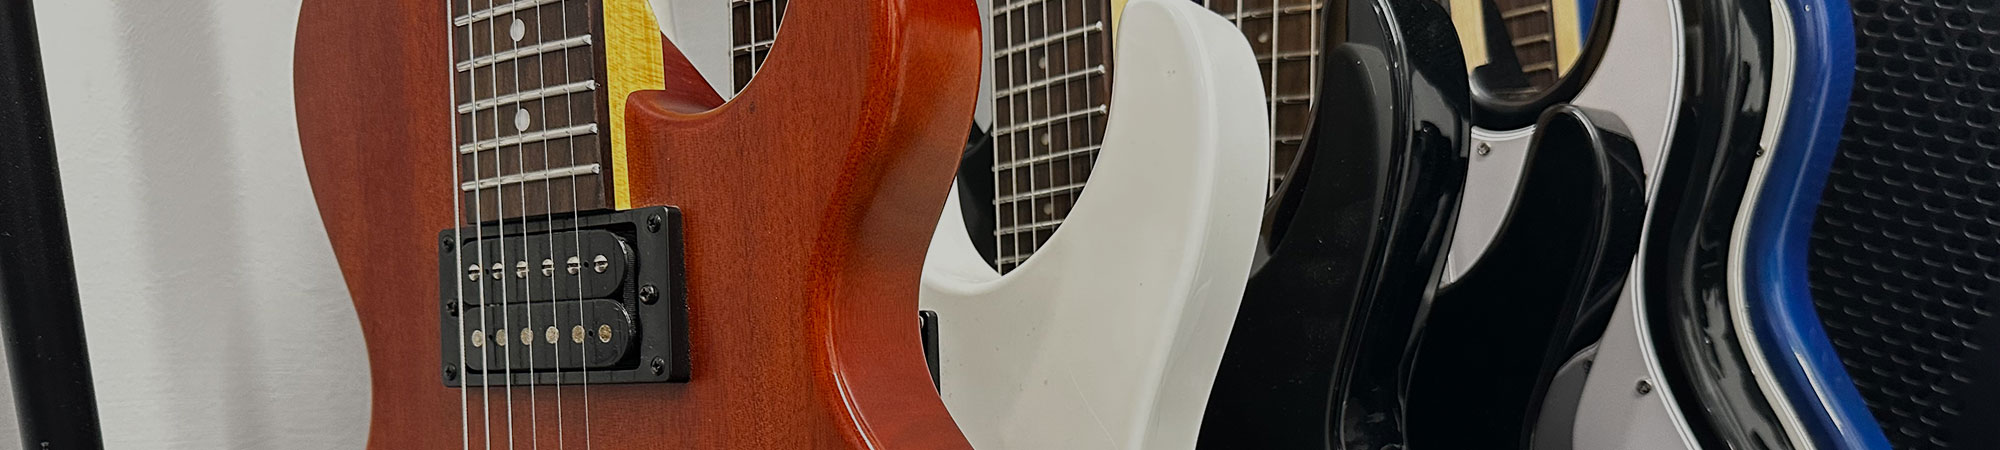 Guitar used in music lessons at Wrexham Sounds